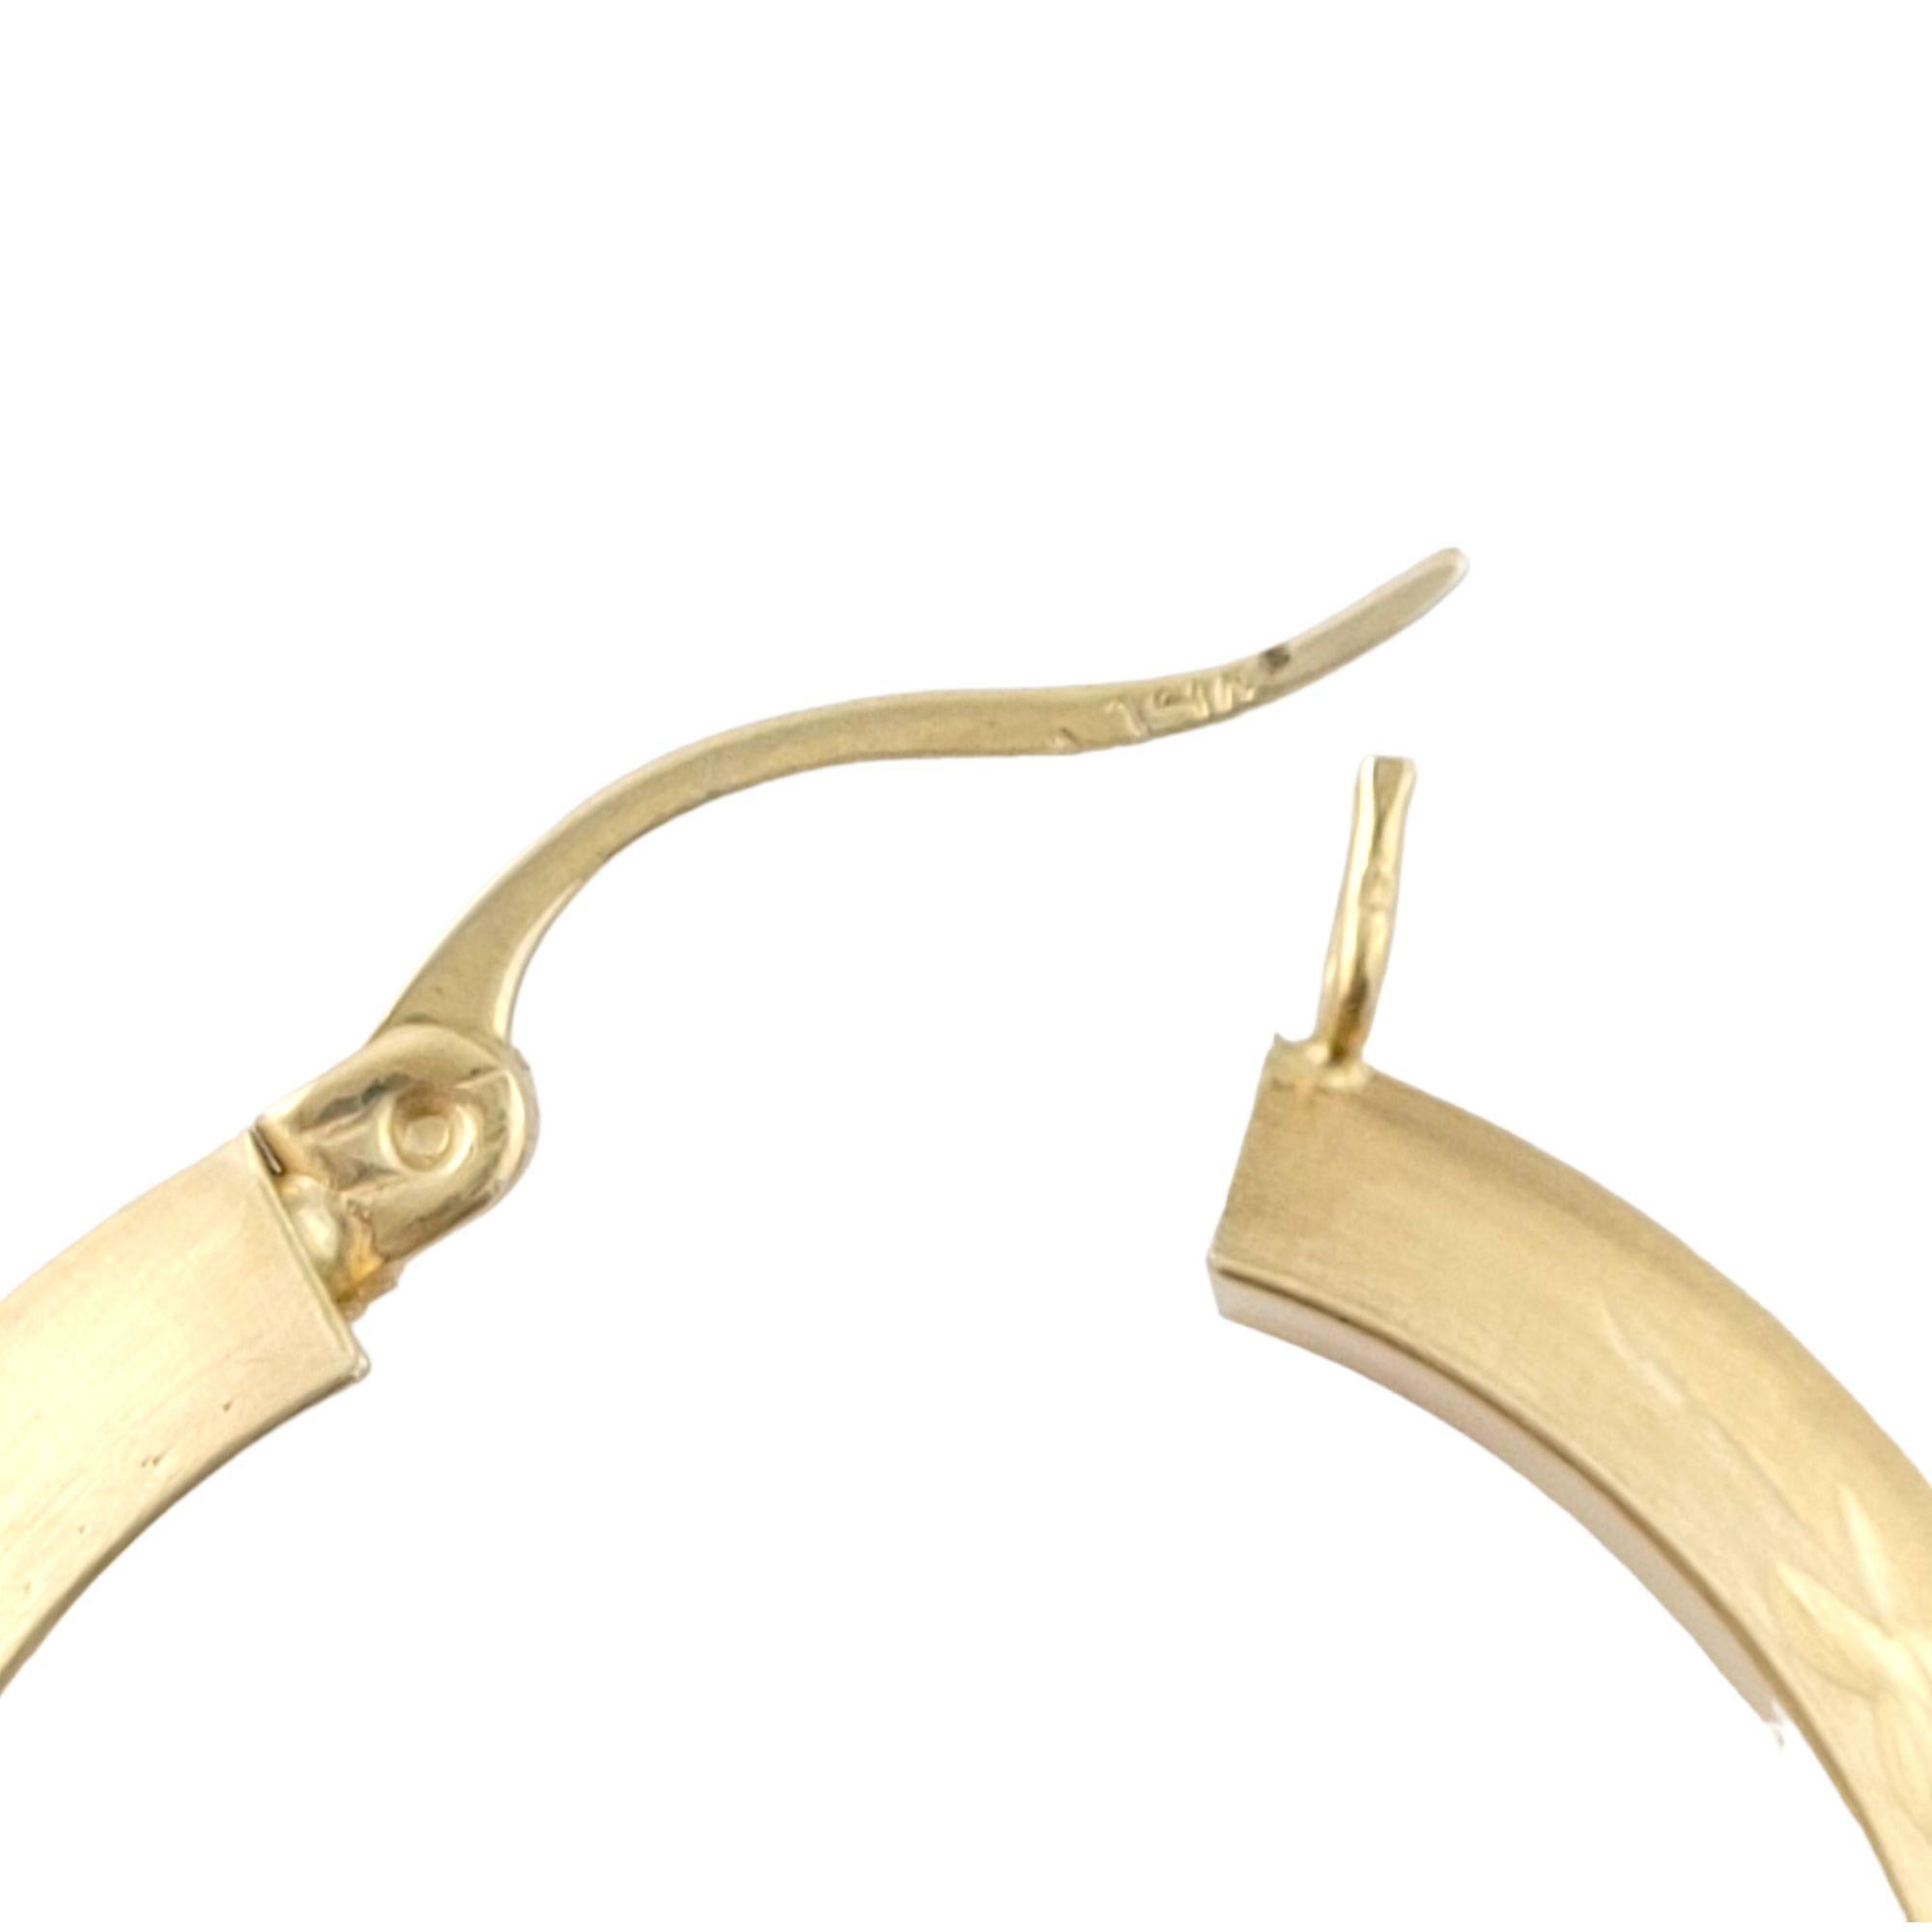 Vintage 14K Yellow Gold Hoops

These beautiful hoops are crafted in 14K yellow gold and feature details of patterns with a matte finish and shinny details.

Dimensions: 34mm X 32mm X 4mm

Weight: 3.5 gr / 2.3 dwt

Hallmark: 14K

Very good condition,